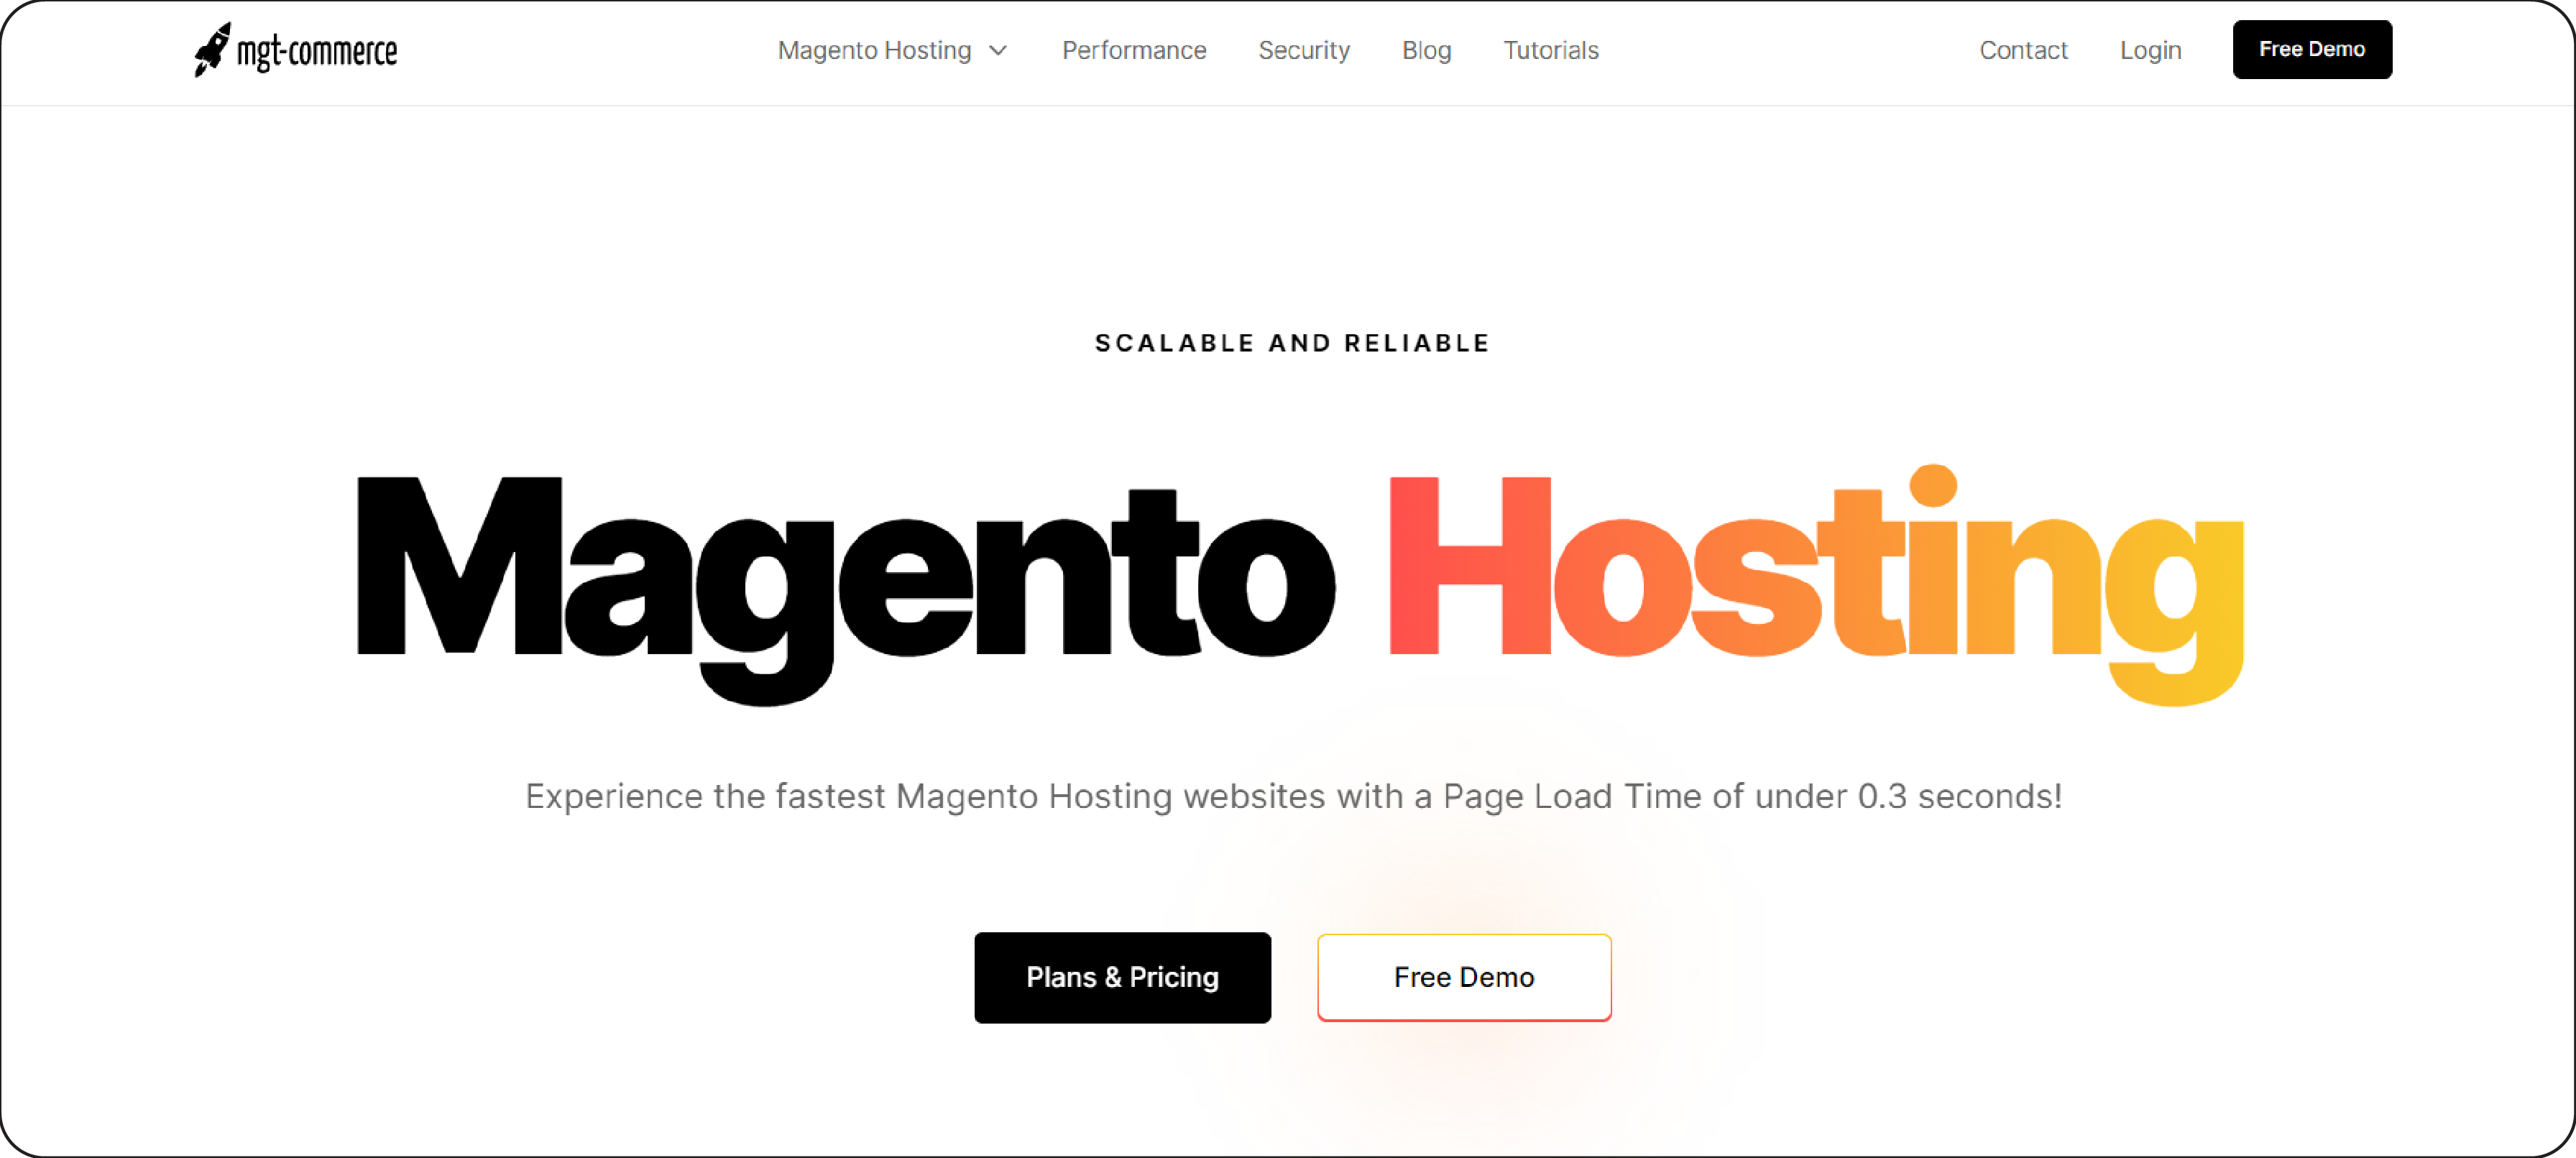 MGT Commerce as the best overall Magento hosting provider